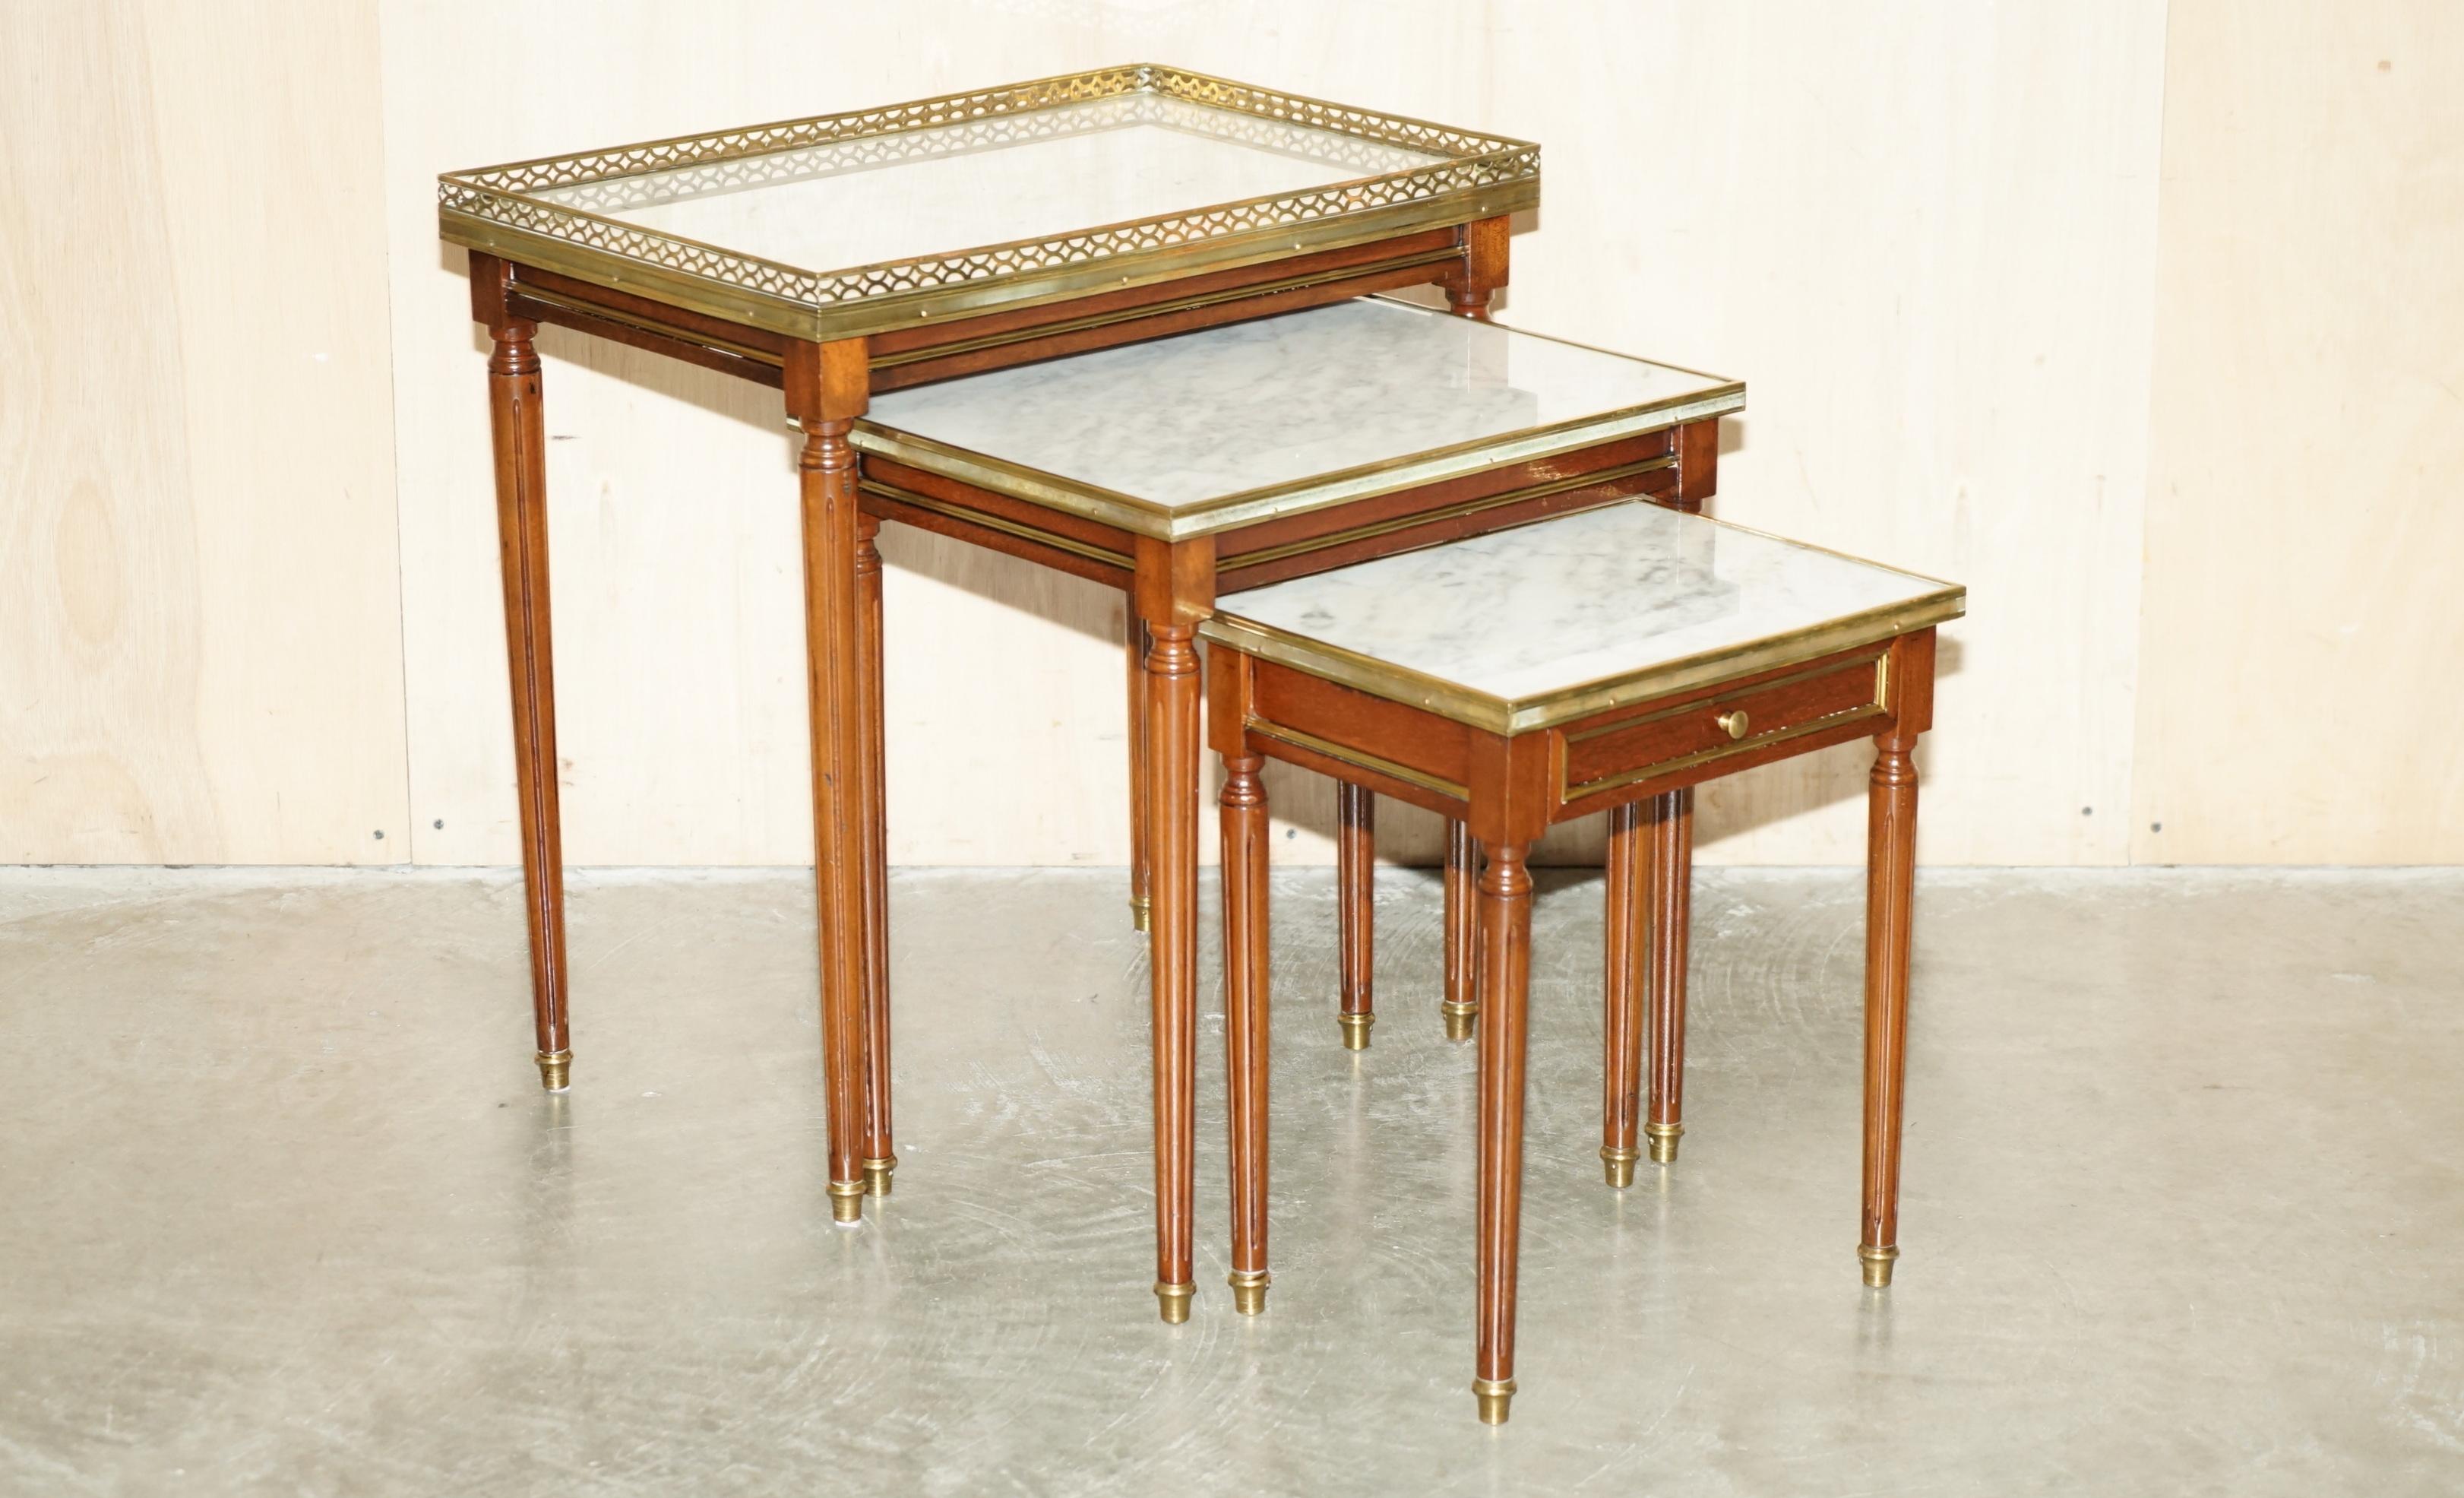 Royal House Antiques

Royal House Antiques is delighted to offer for sale this stunning nest of French Empire tables with gilt brass gallery rails and Italian Carrara Marble tops purchased from Lyon France 

Please note the delivery fee listed is